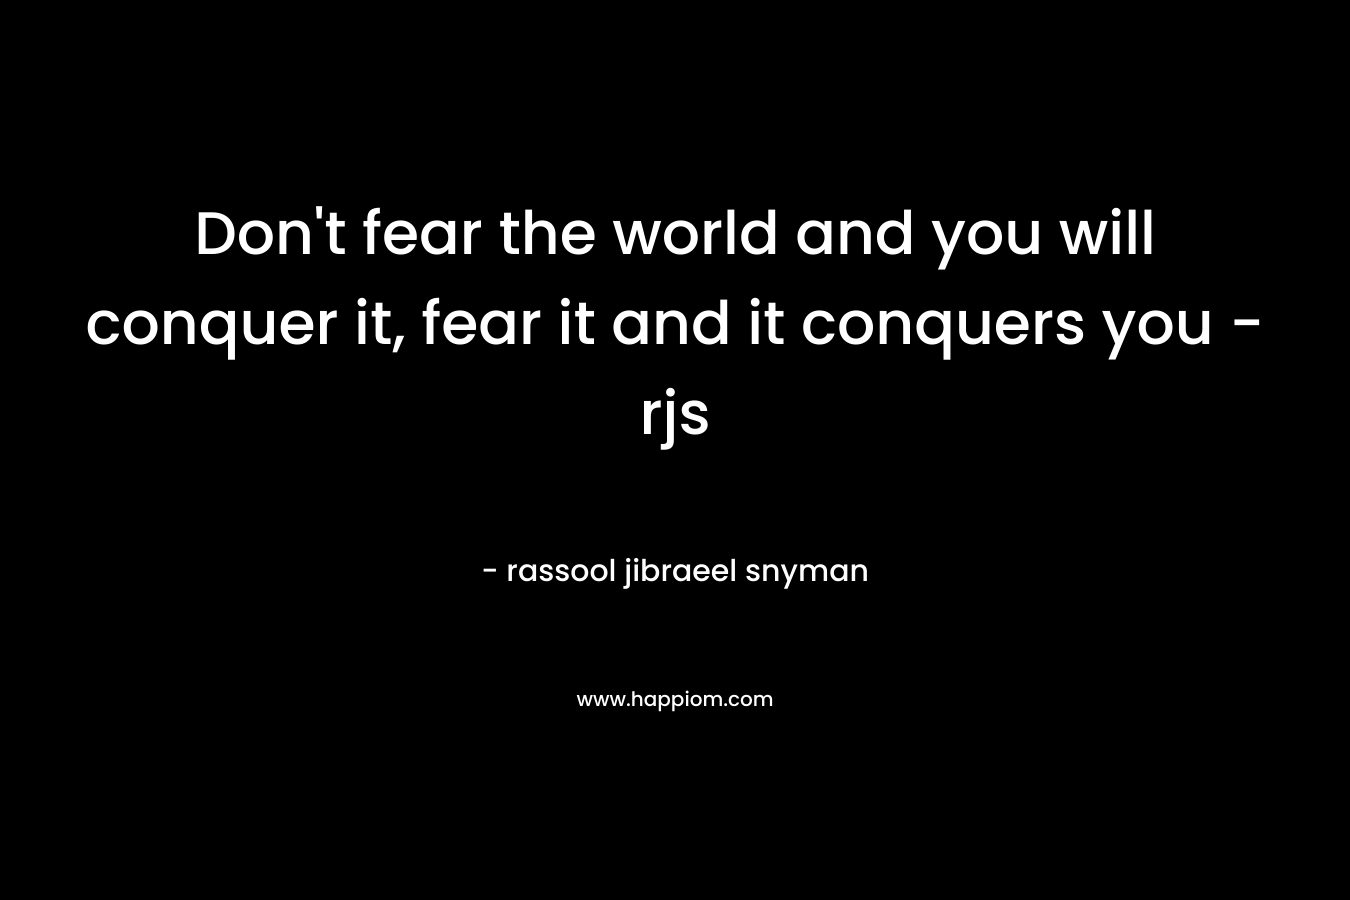 Don't fear the world and you will conquer it, fear it and it conquers you - rjs